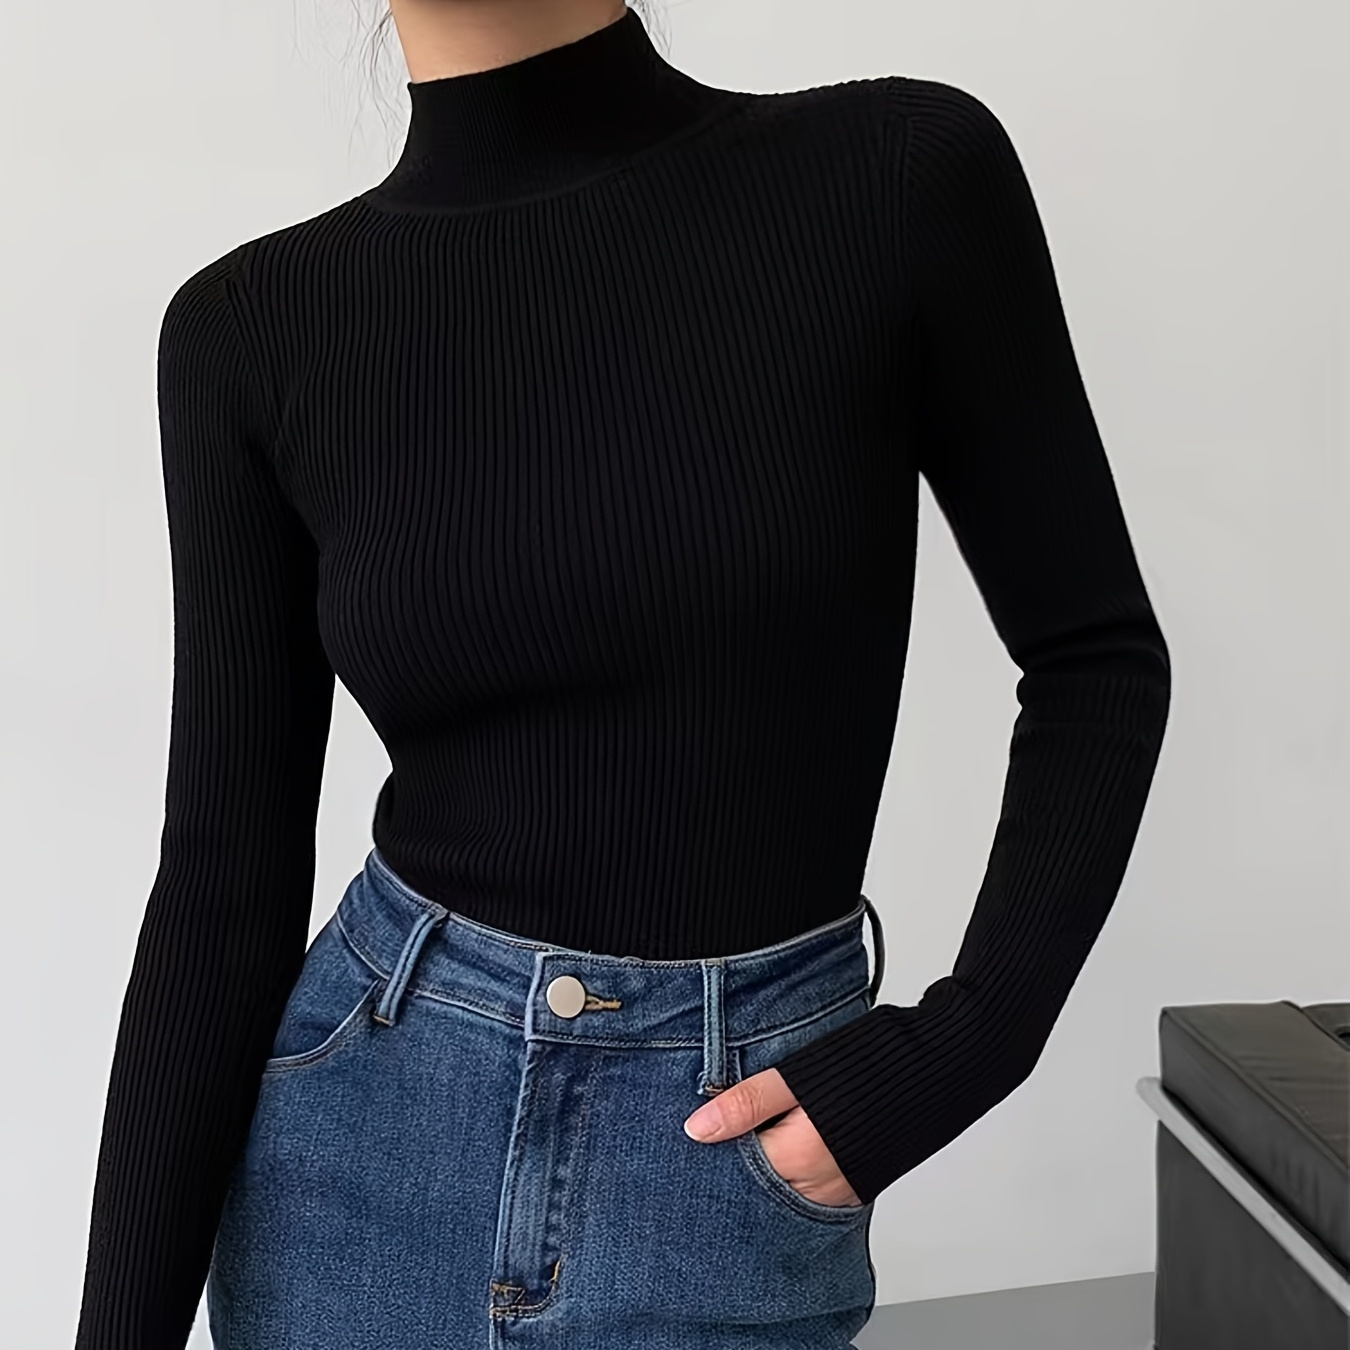 Solid Rib-knit Crew Neck Sweater, Women's Sweater Mock Neck Ribbed Long ...